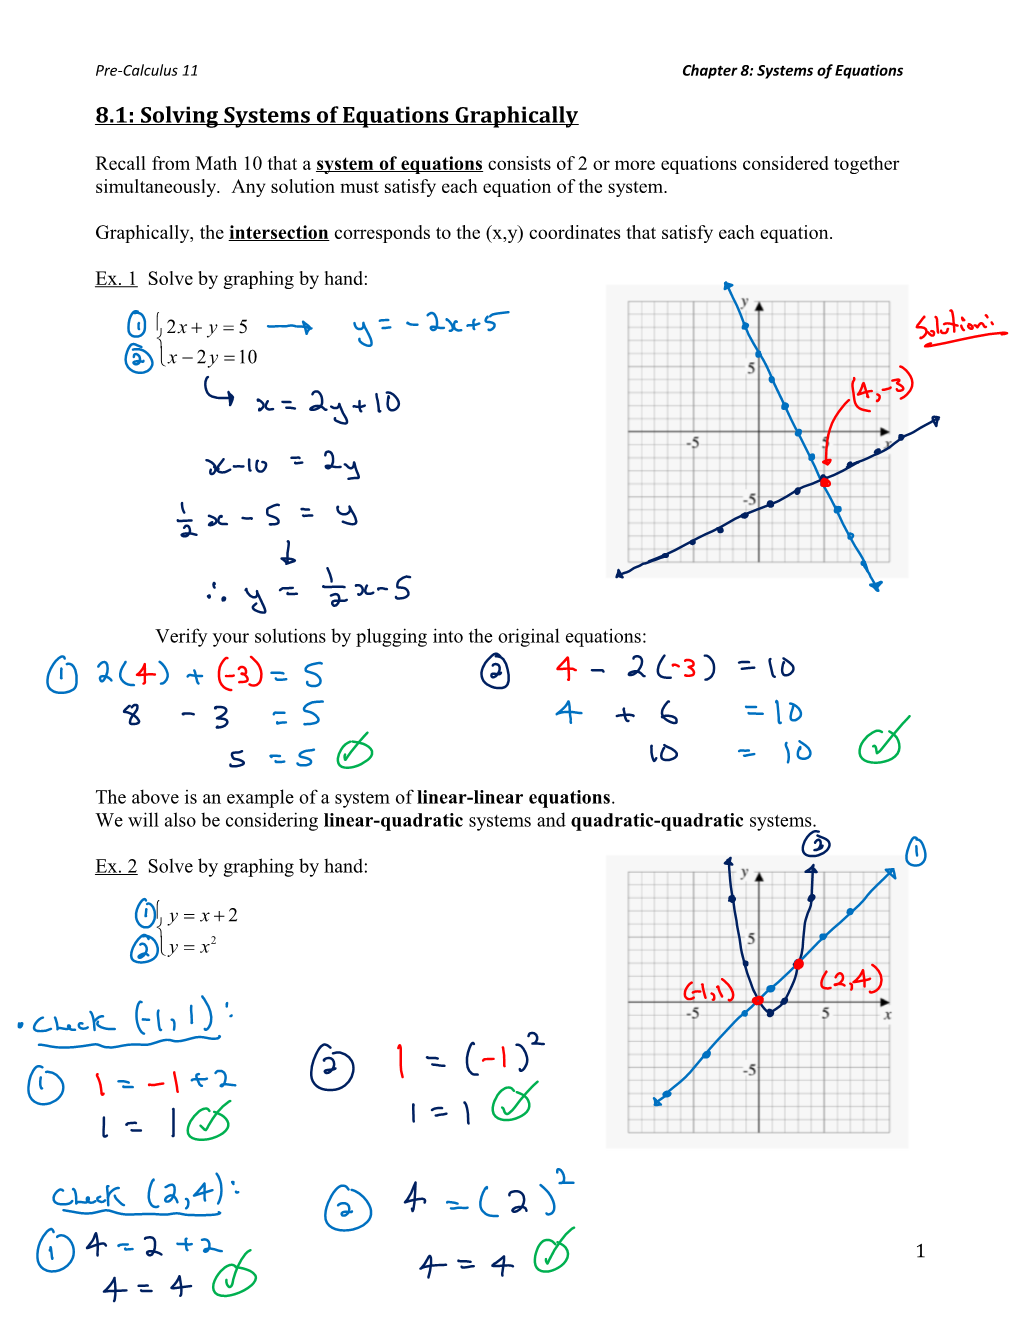 8.1: Solving Systems of Equations Graphically